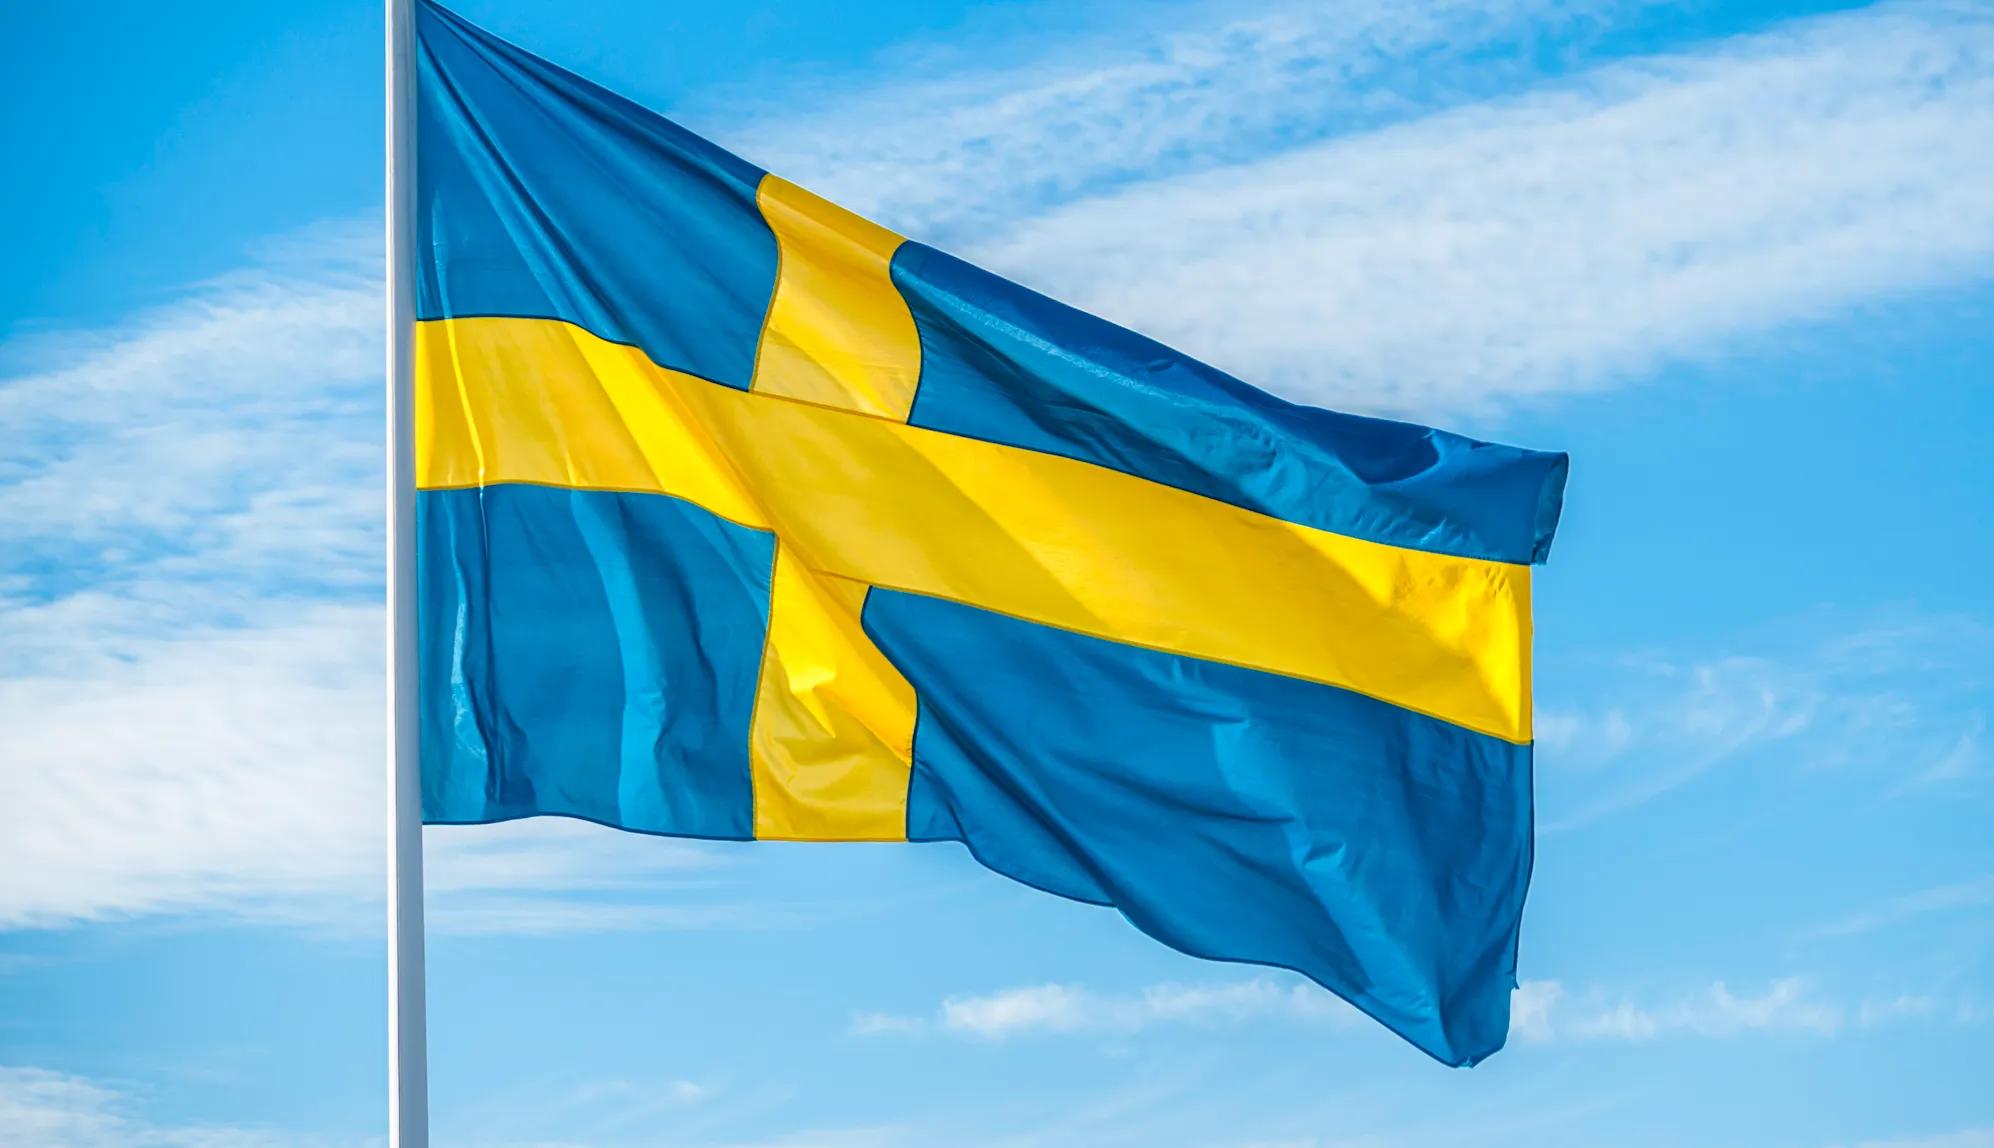 Sweden lowers age to change legal gender from 18 to 16 [Video]